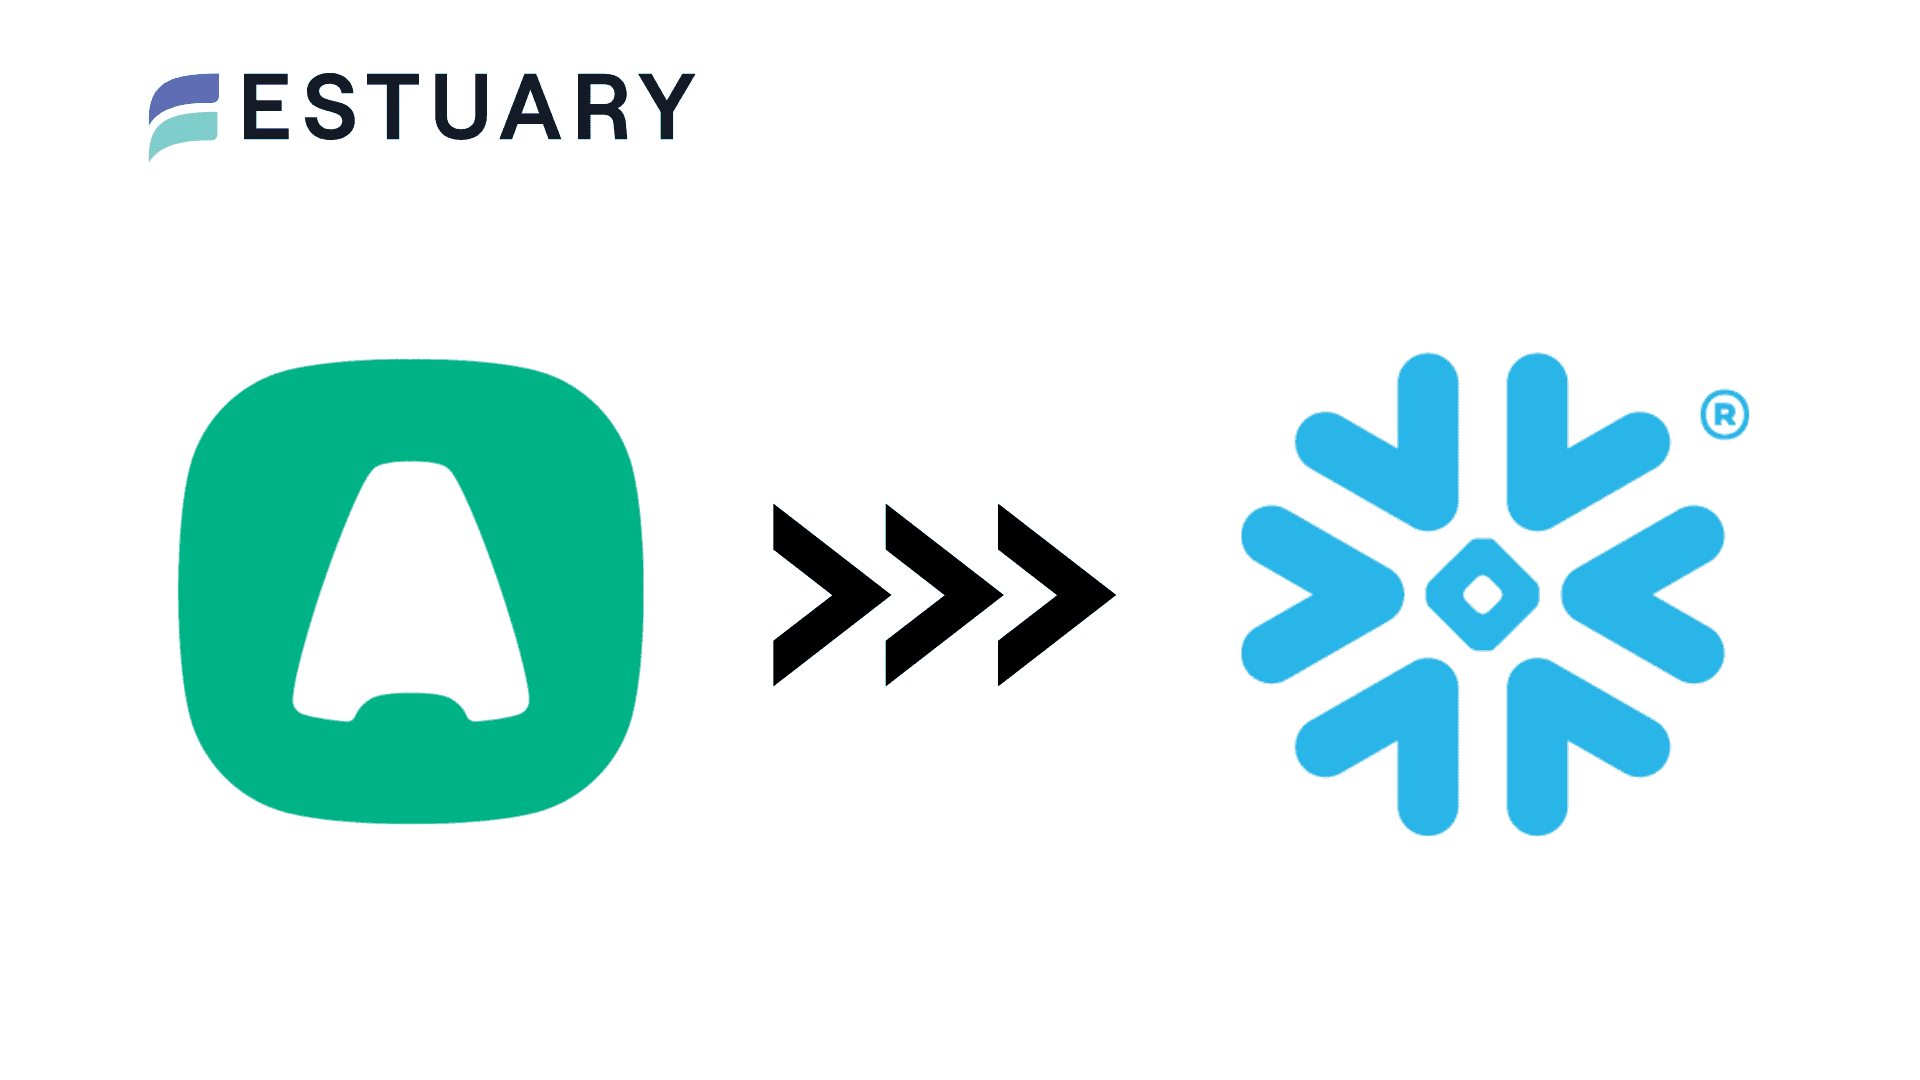 Load Data From Aircall to Snowflake (Quick Integration Guide)